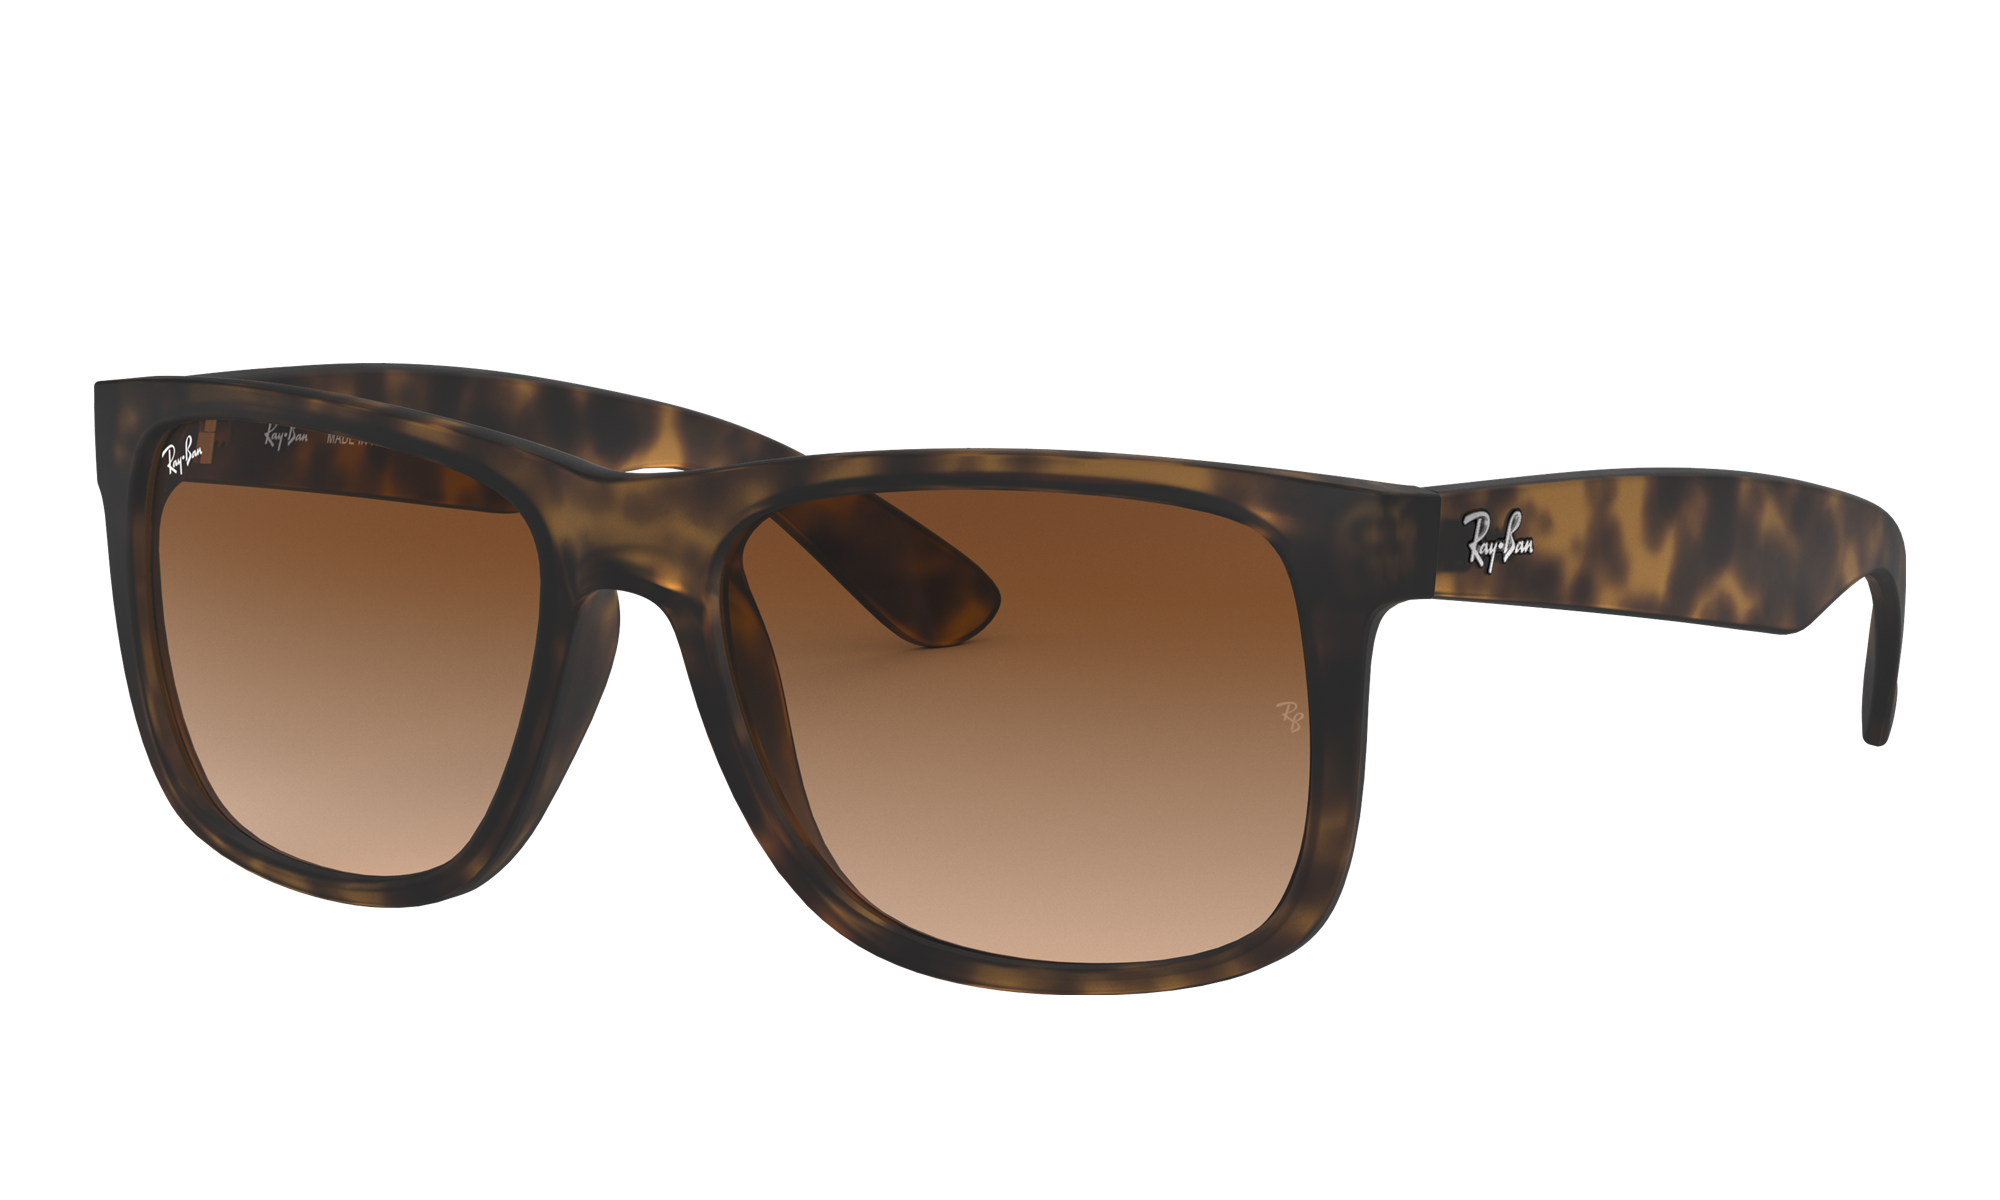 Ray-Ban Unisex Rb4165 Havana Size: Extra Small -  0RB4165